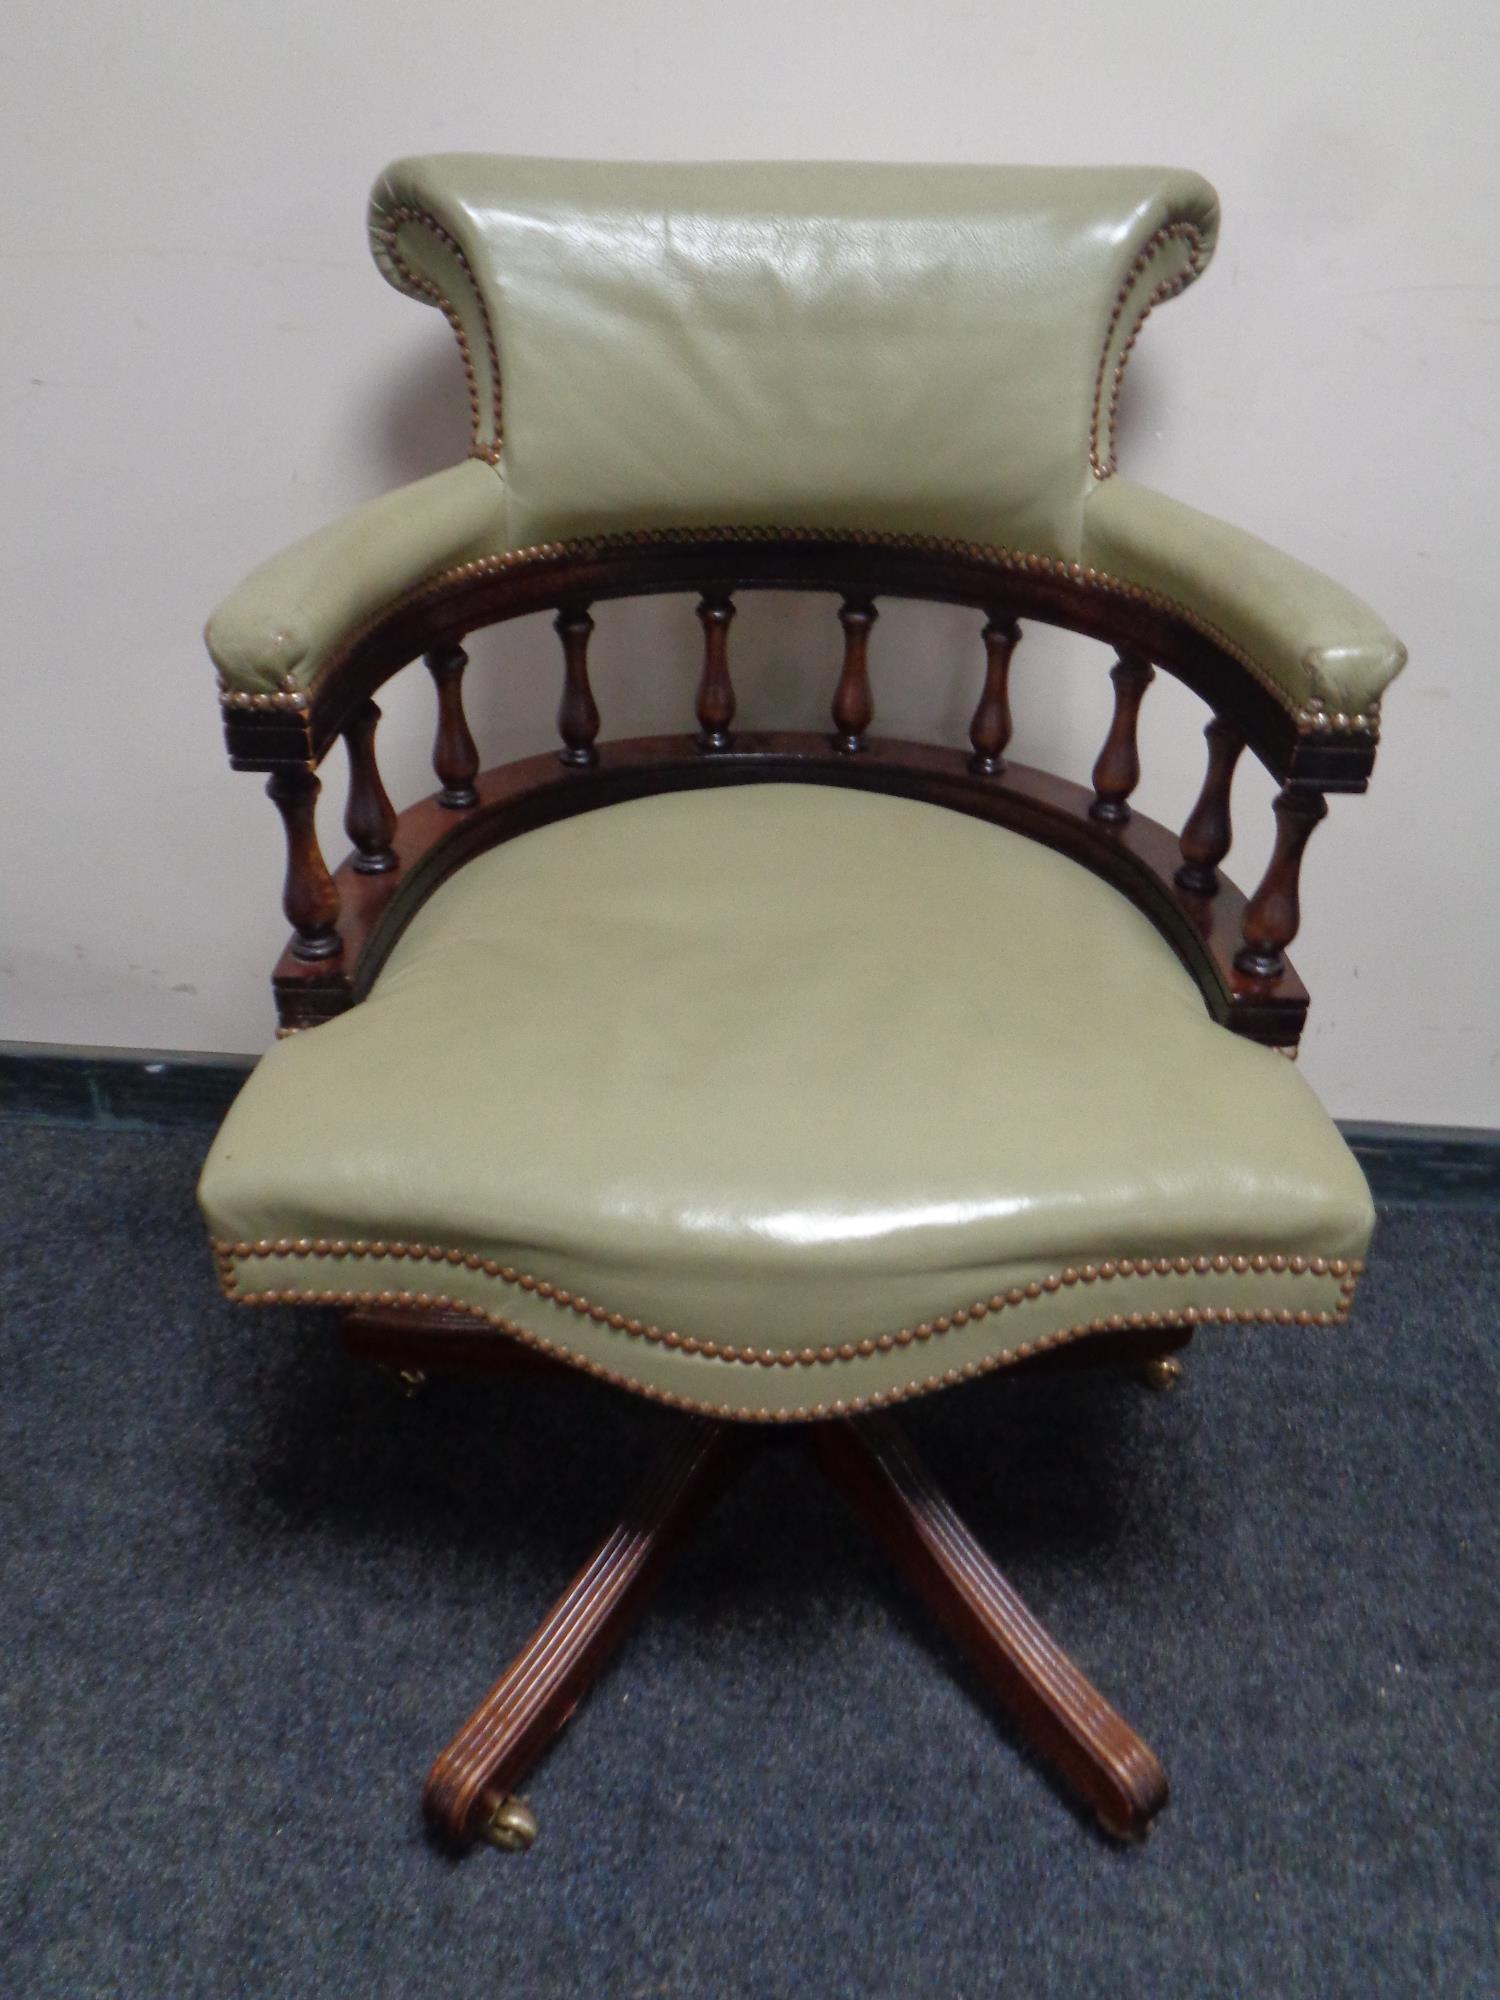 A captain's swivel desk chair upholstered in a light green leather